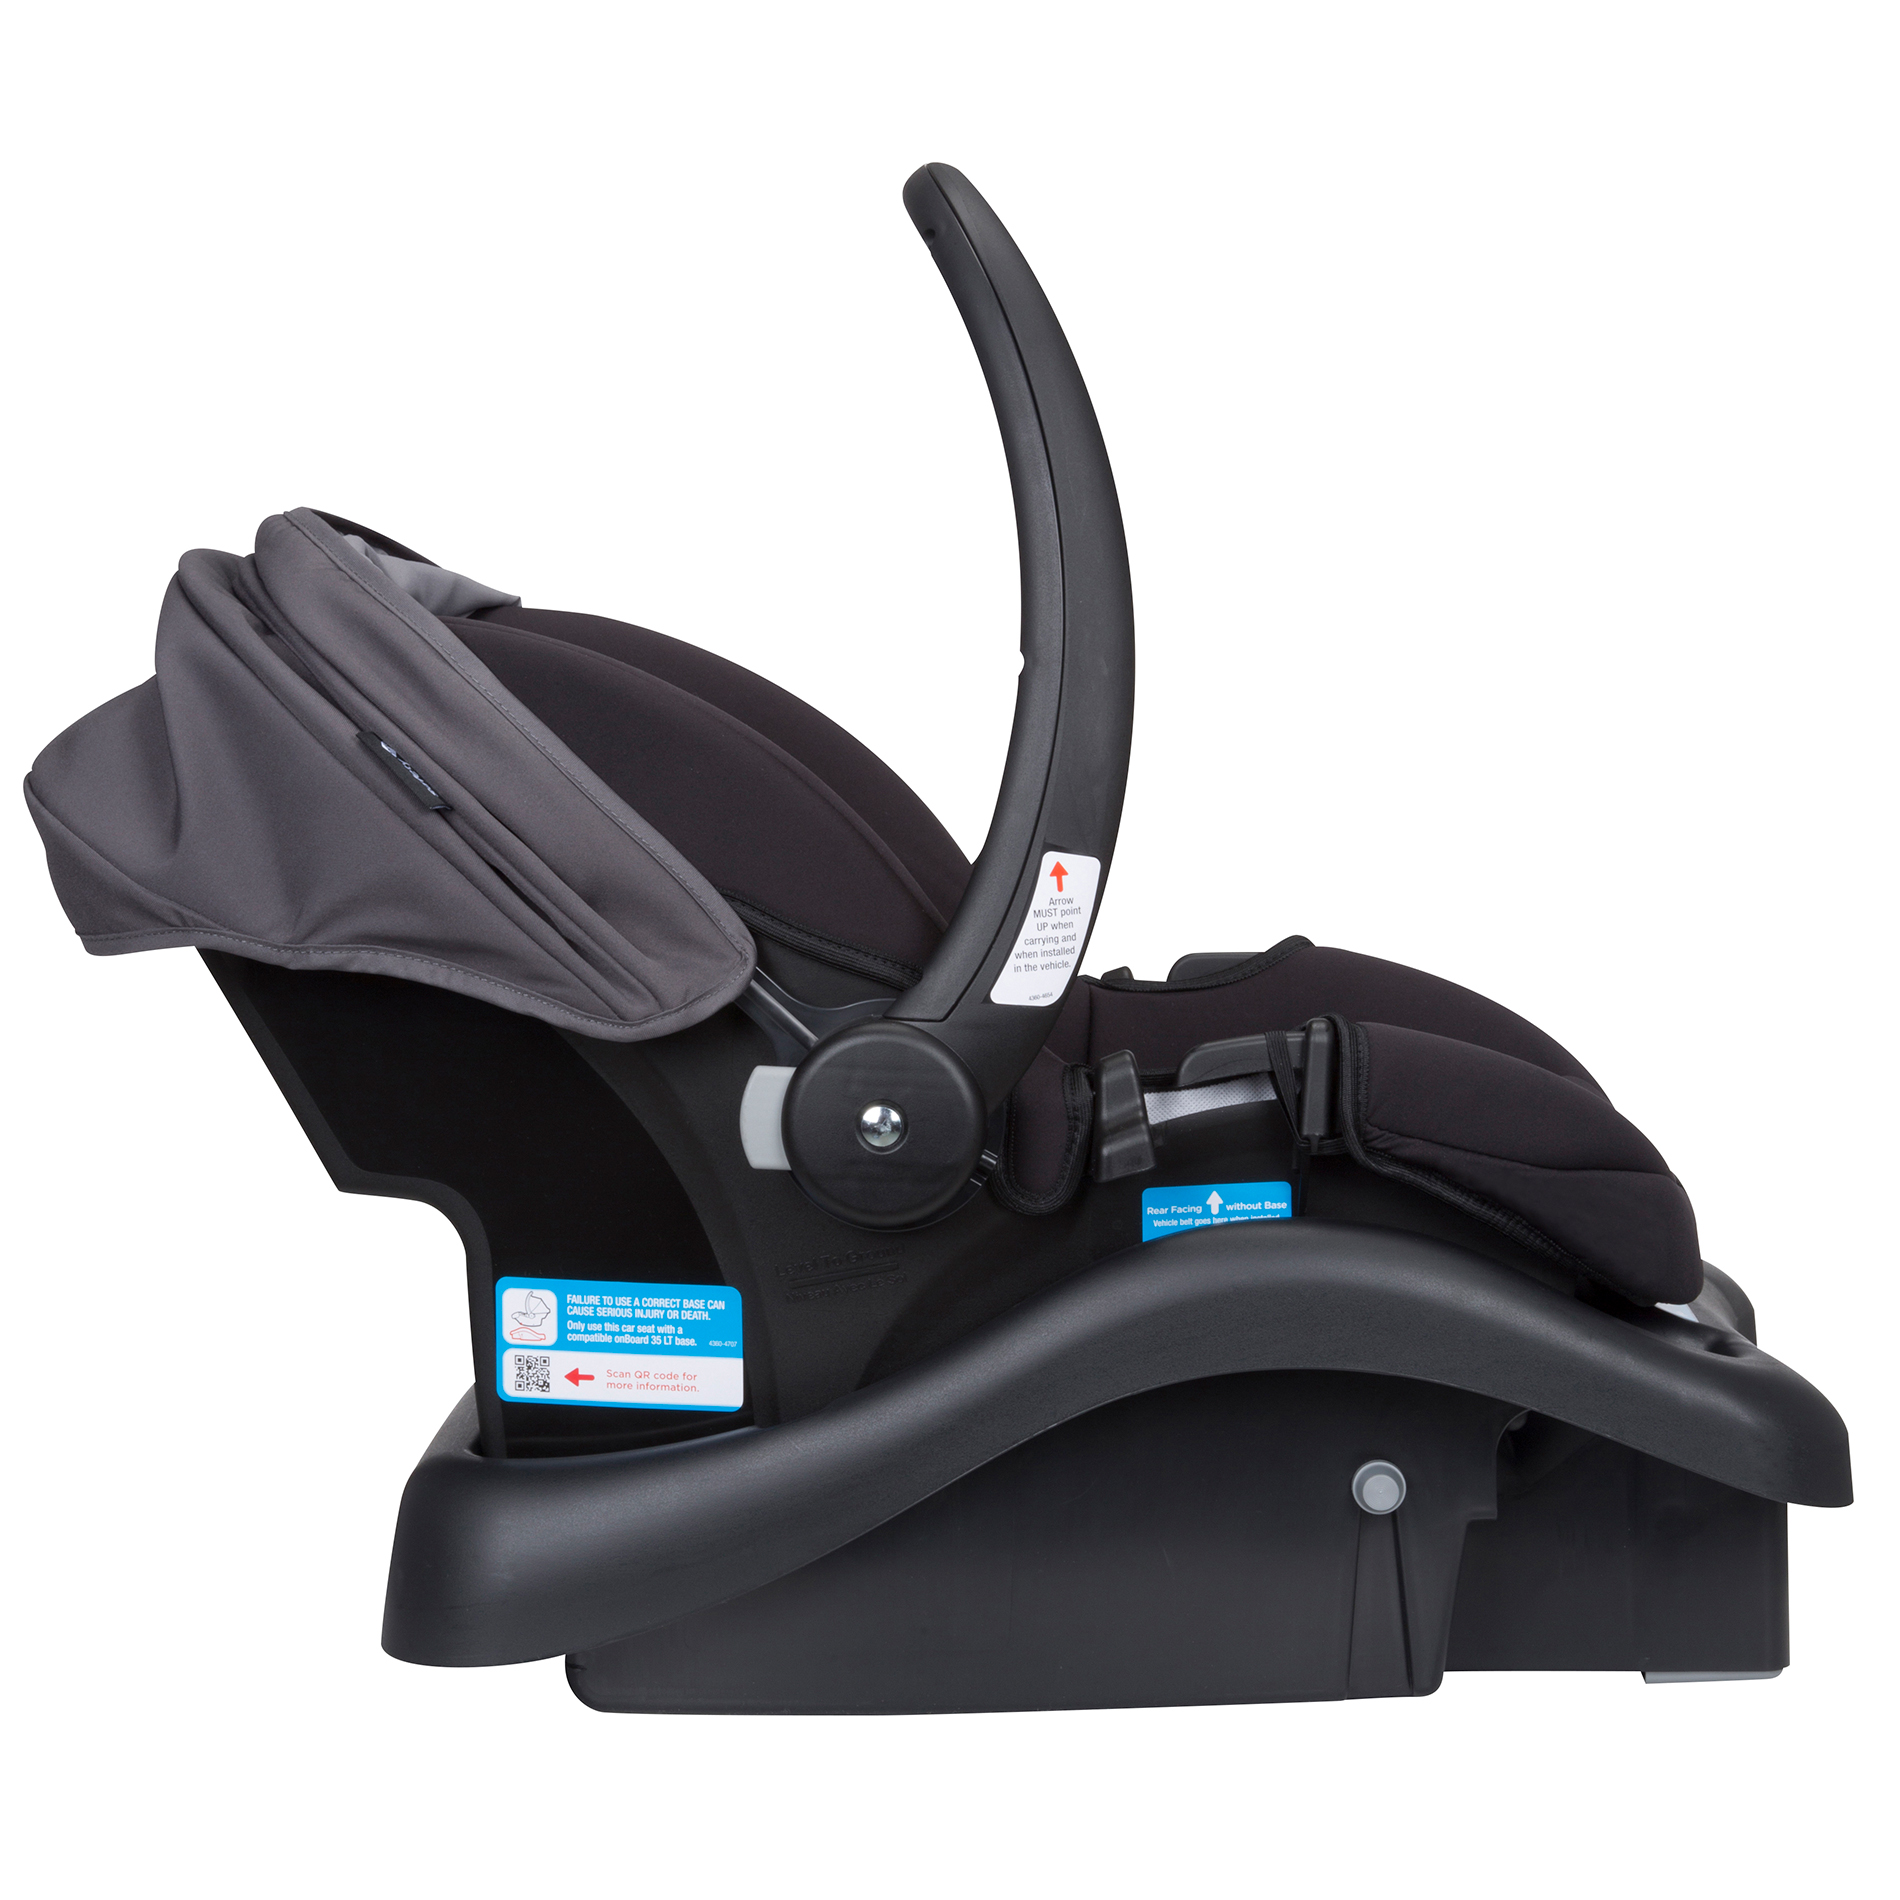 safety 1st onboard 35 travel system